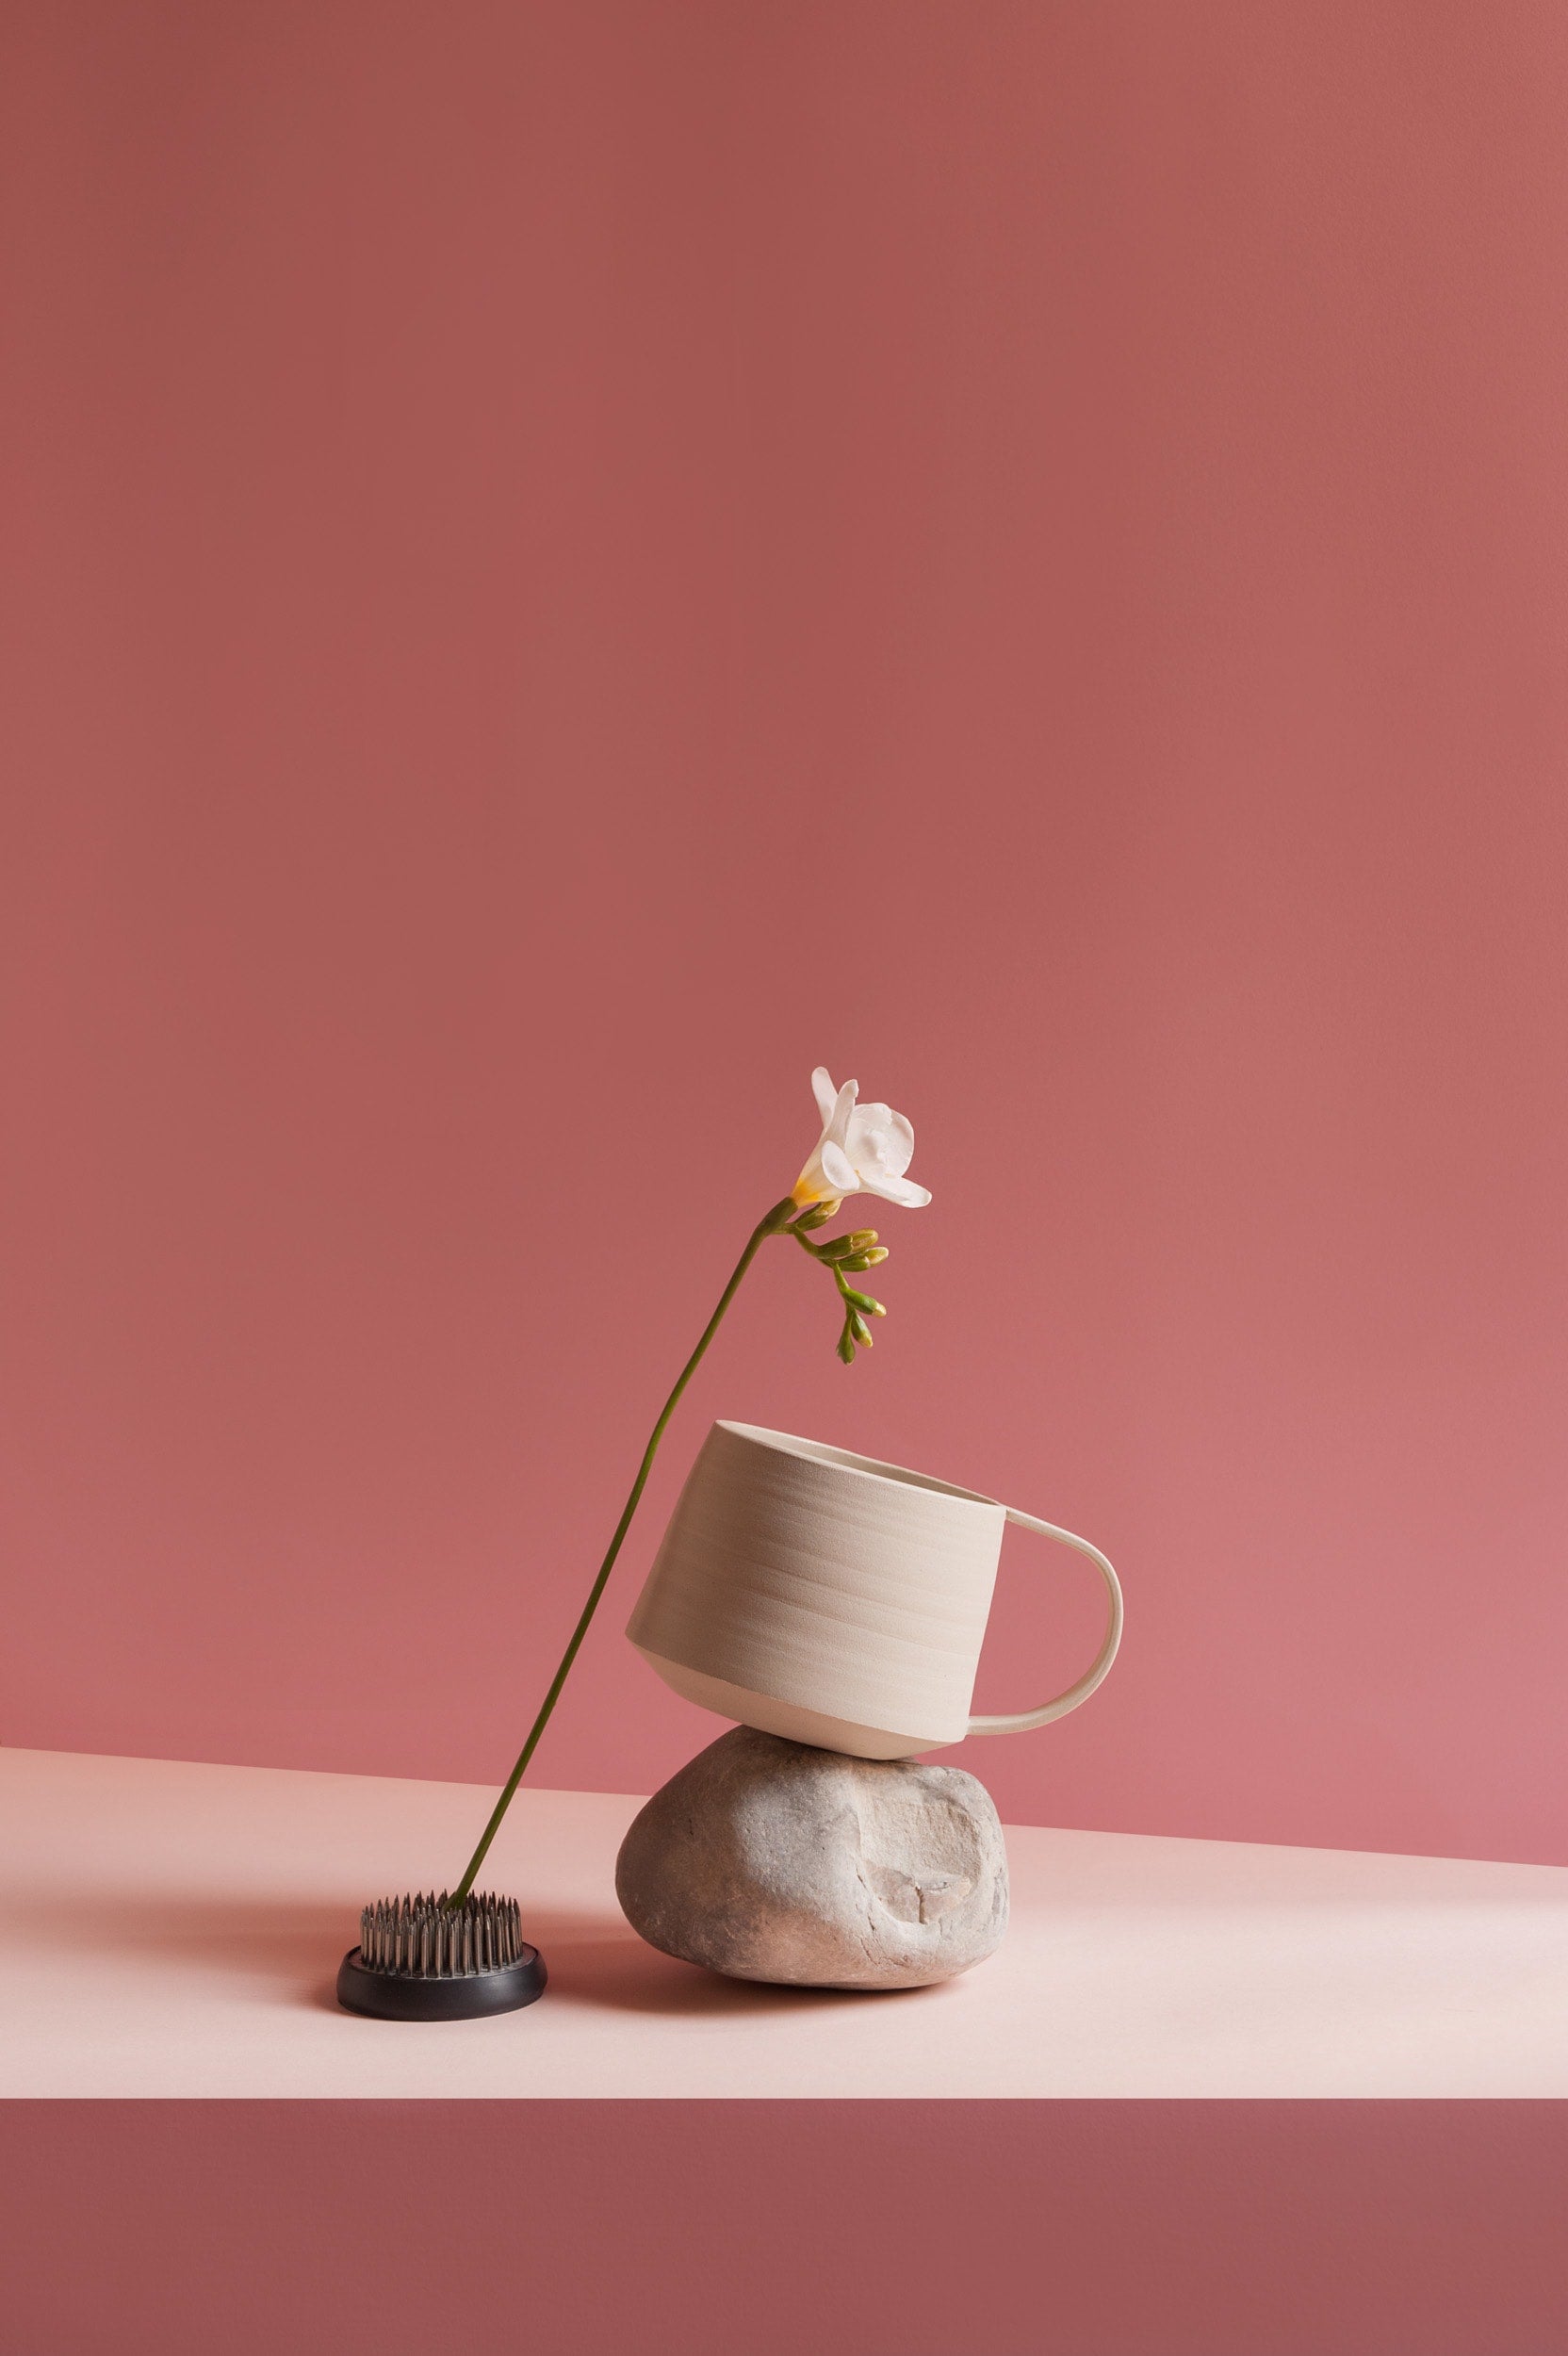 The artpiece 'Tension' by Erica Ferraroni is a still life photography piece containing a cup, a rock and a flower, put together to create an interesting composition of objects in this piece about tension and balance.